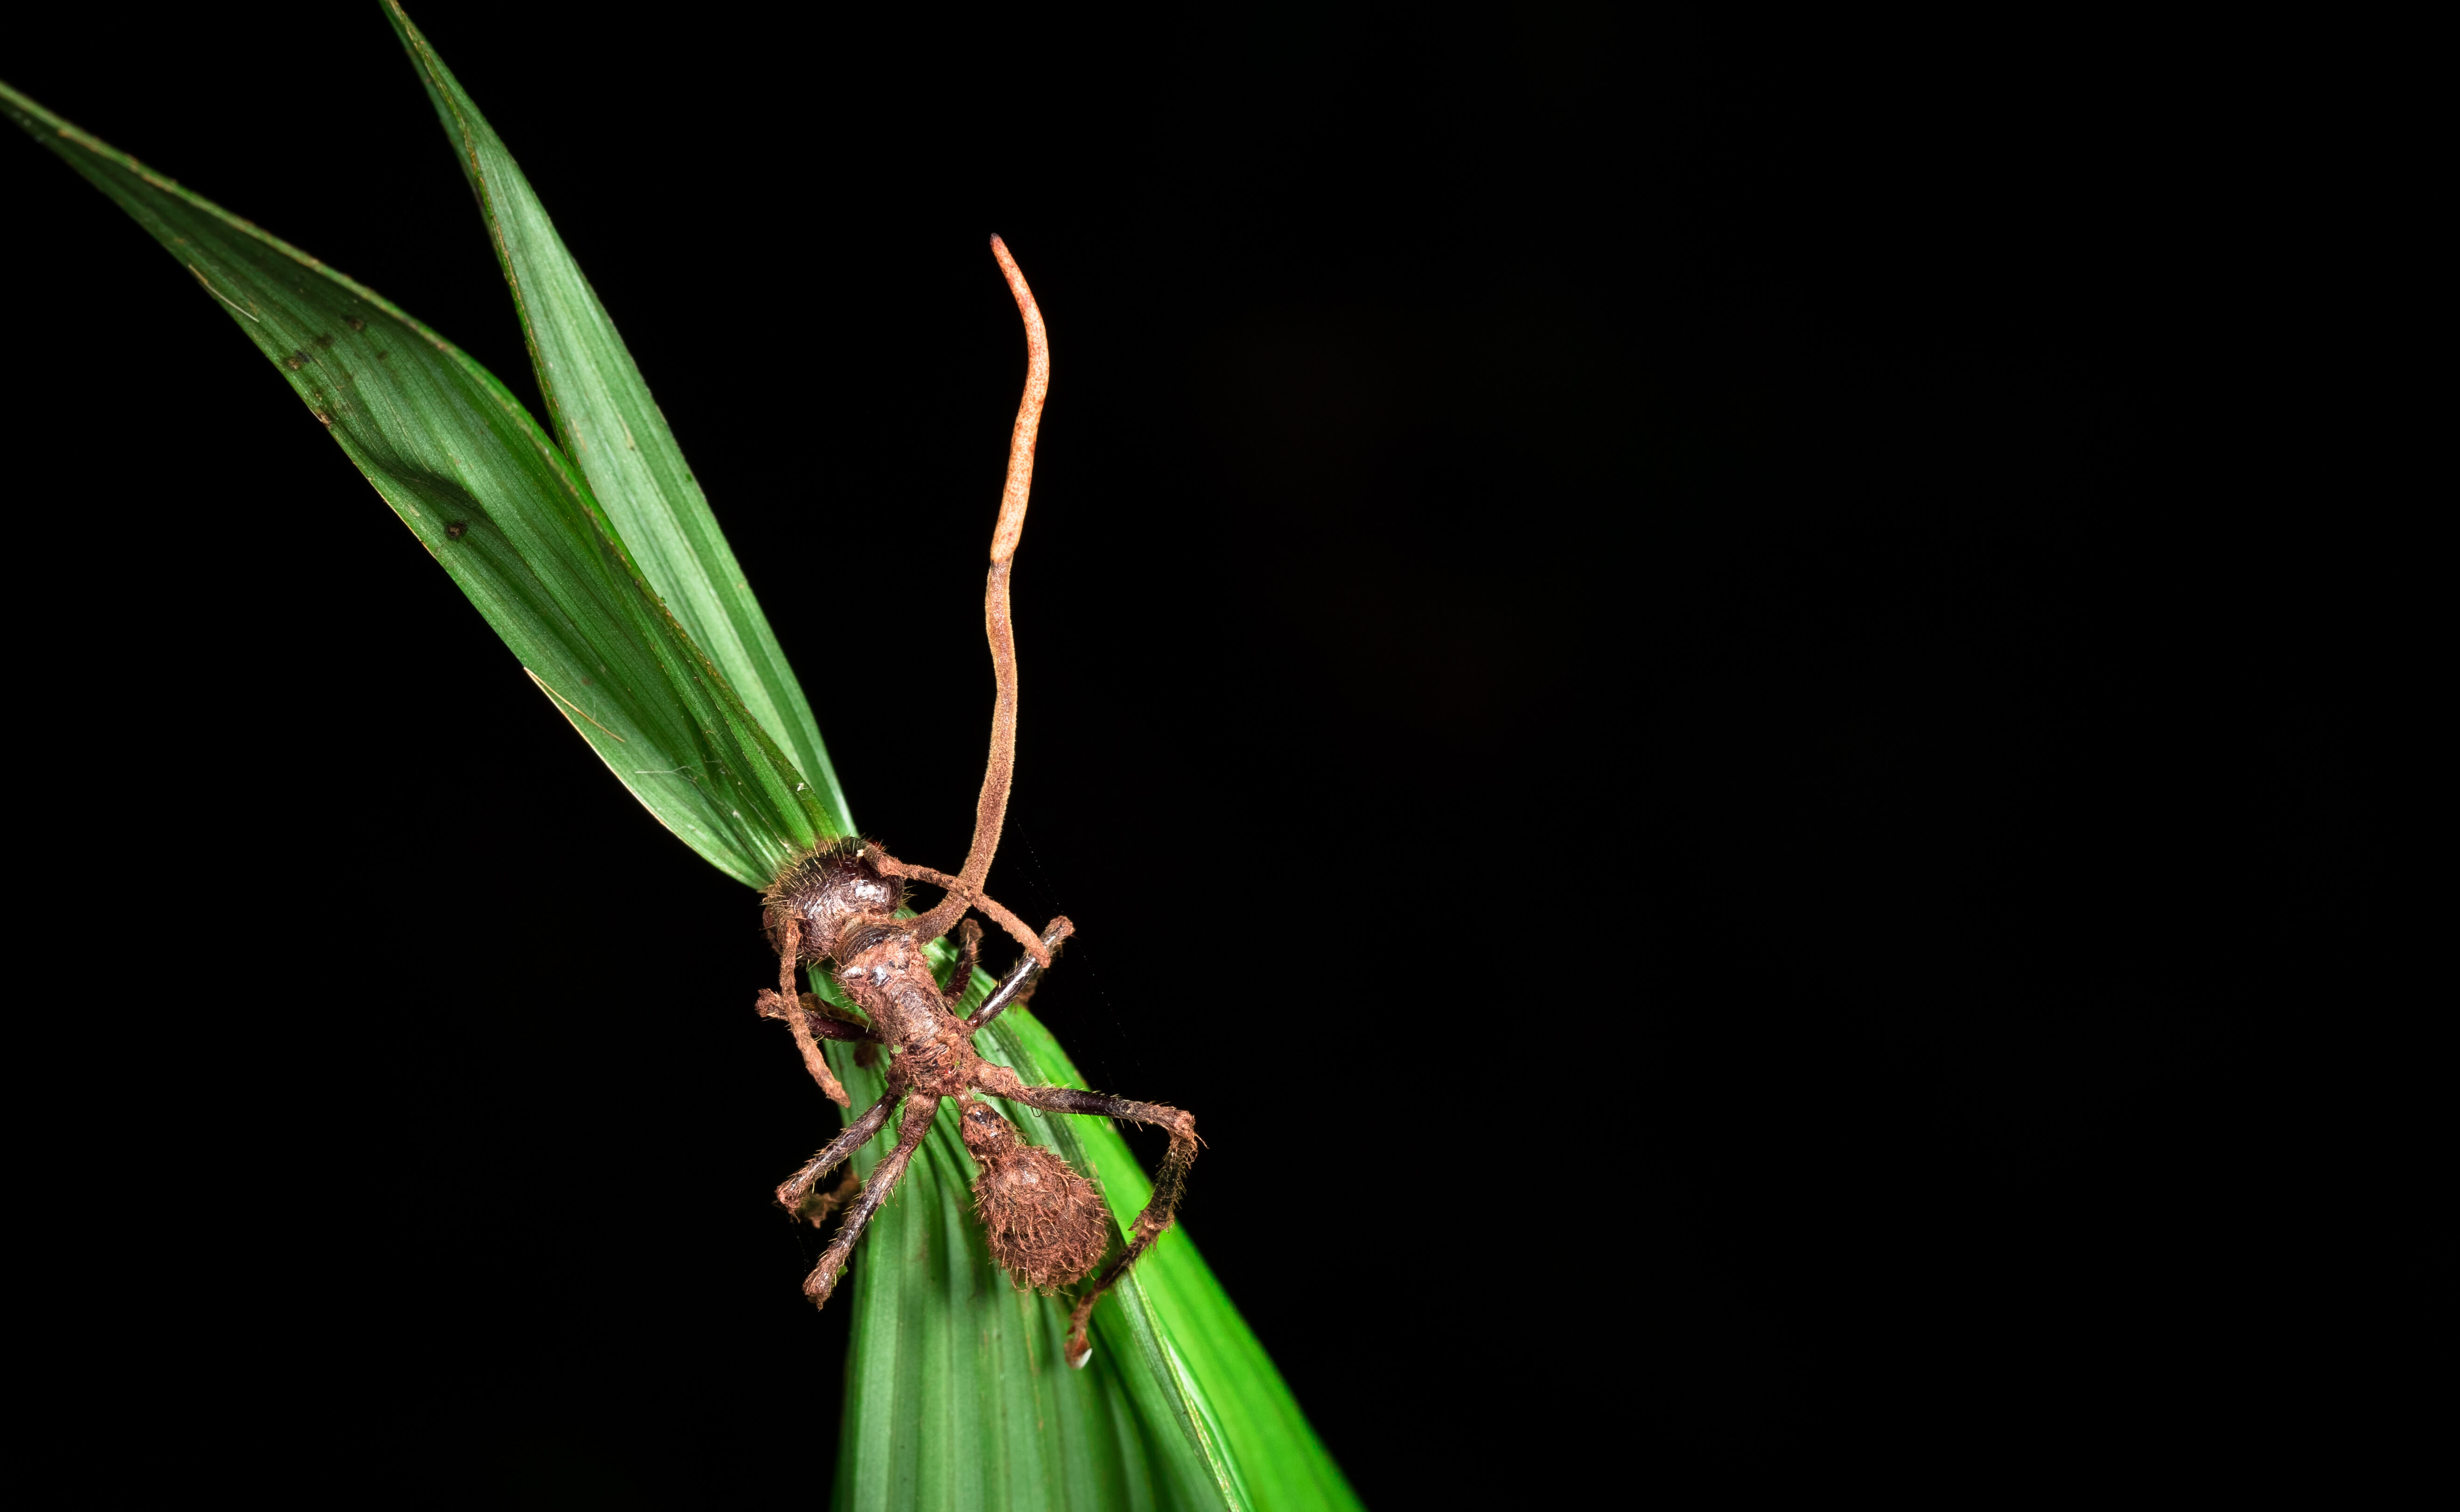 A dead ant clings to a blade of grass with its jaws; a single fungal growth sprouts upward from its back, twice as long as the ant itself and only slightly thicker than one of its legs.